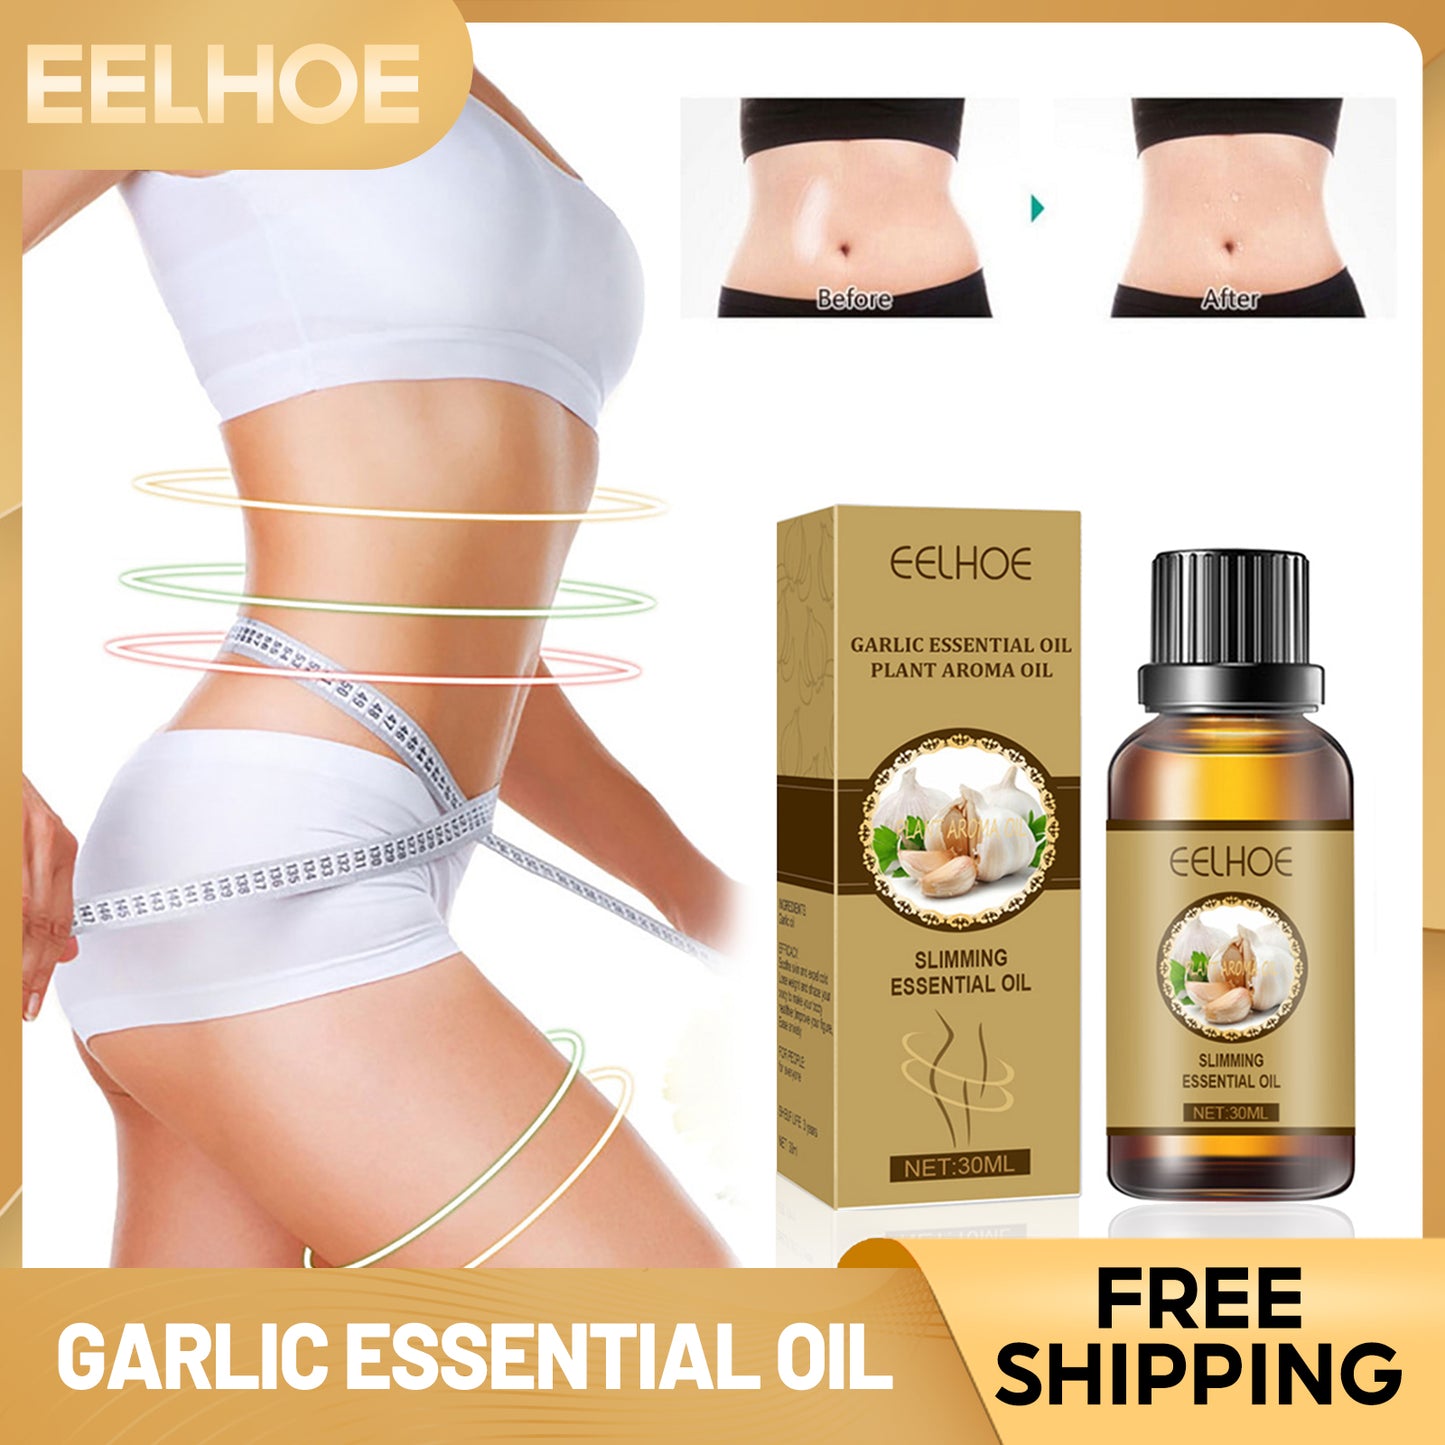 EELHOE Slimming Essential Oil for Men and Women Lose Fat, Firms Skin Body Care(30ml)